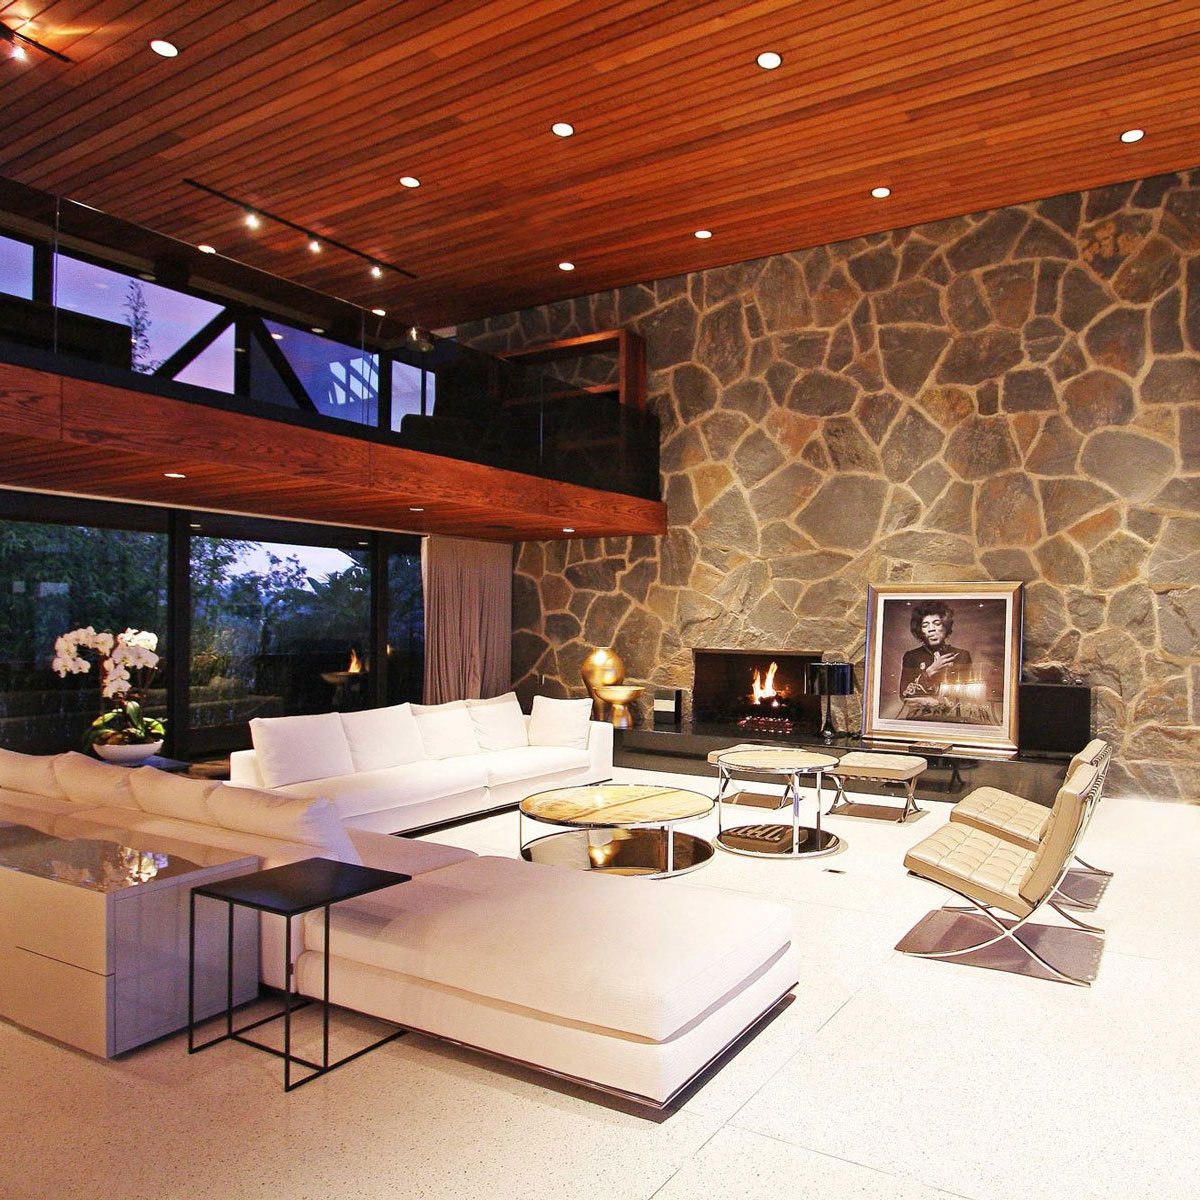 Recessed Lighting in a Living Room